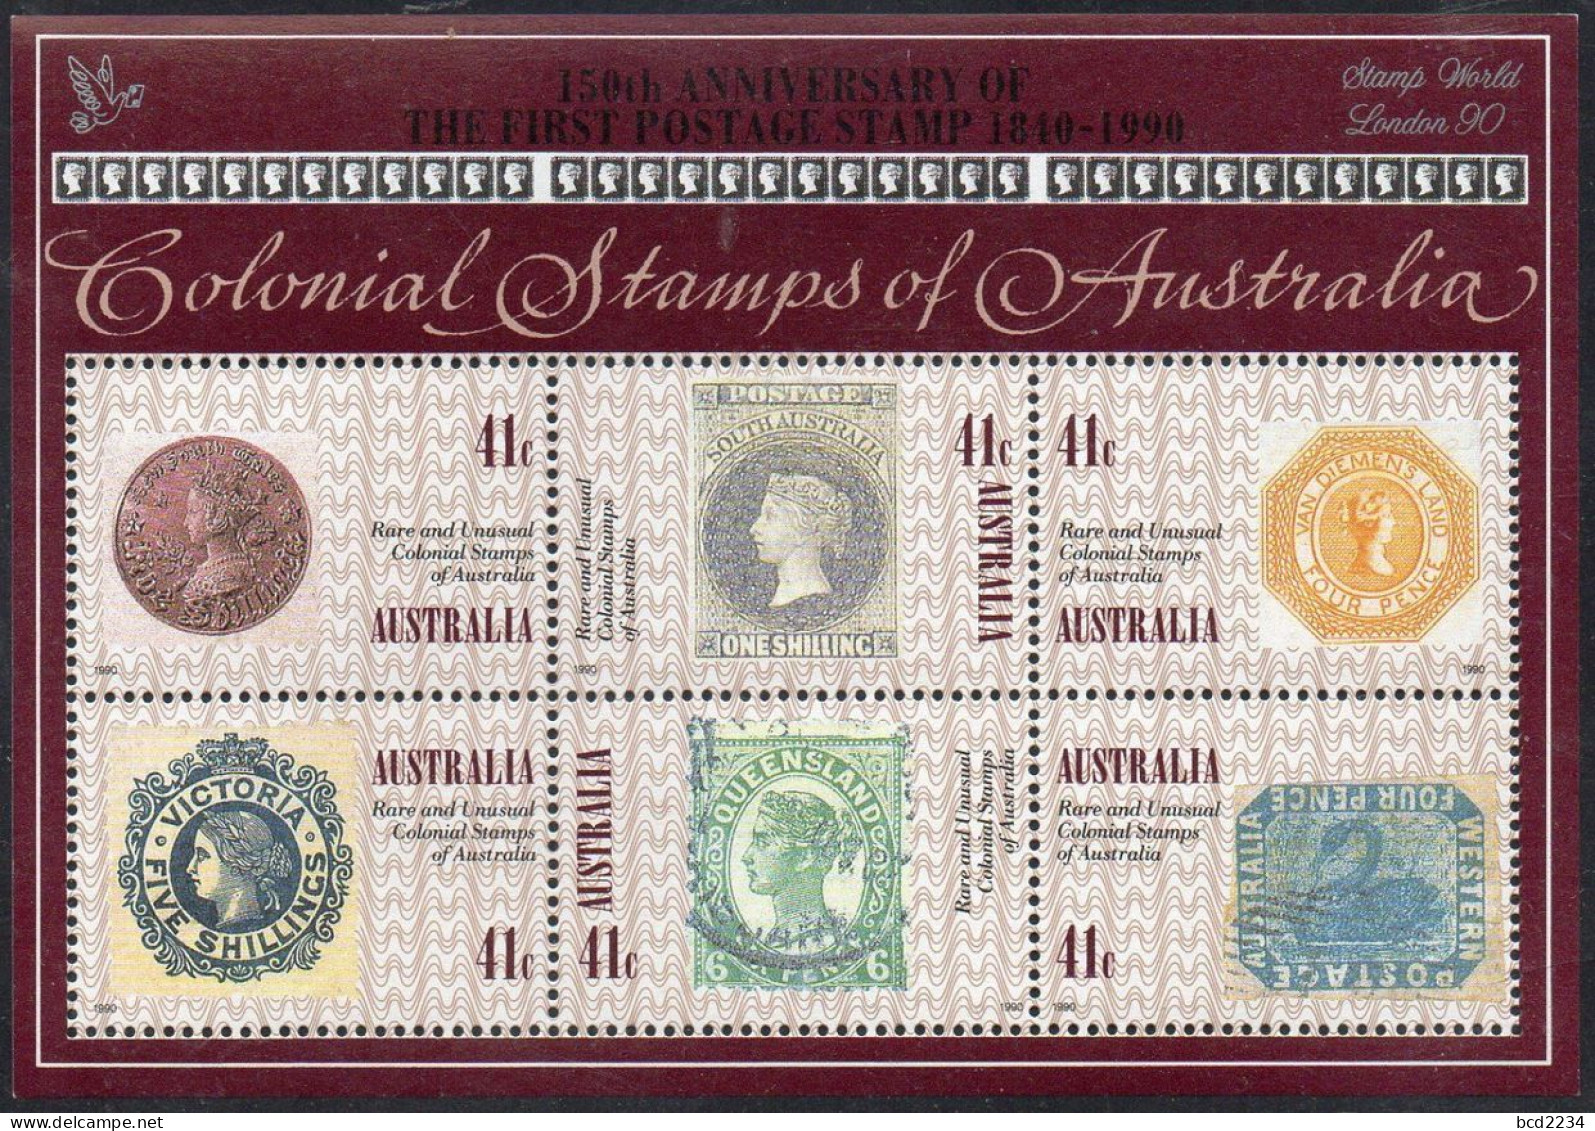 AUSTRALIA 1990 RARE & UNUSUAL COLONIAL STAMPS X10 + SILVER STAMP WORLD LONDON 90 OVERPRINT SG MS1253 Mi BL 10 MNH - Blocs - Feuillets